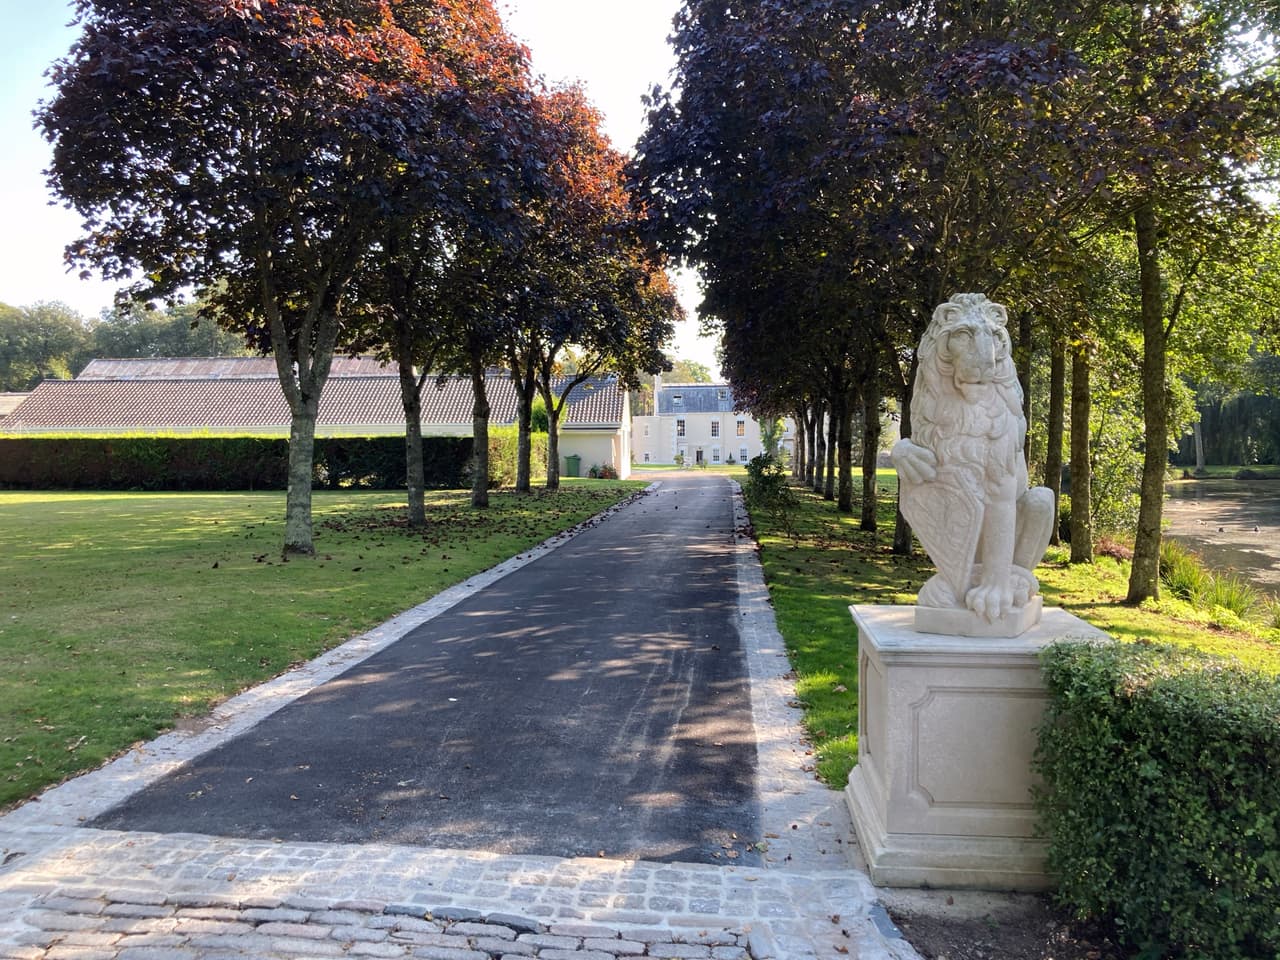 The driveway up to the manor, flanked by a lion statue